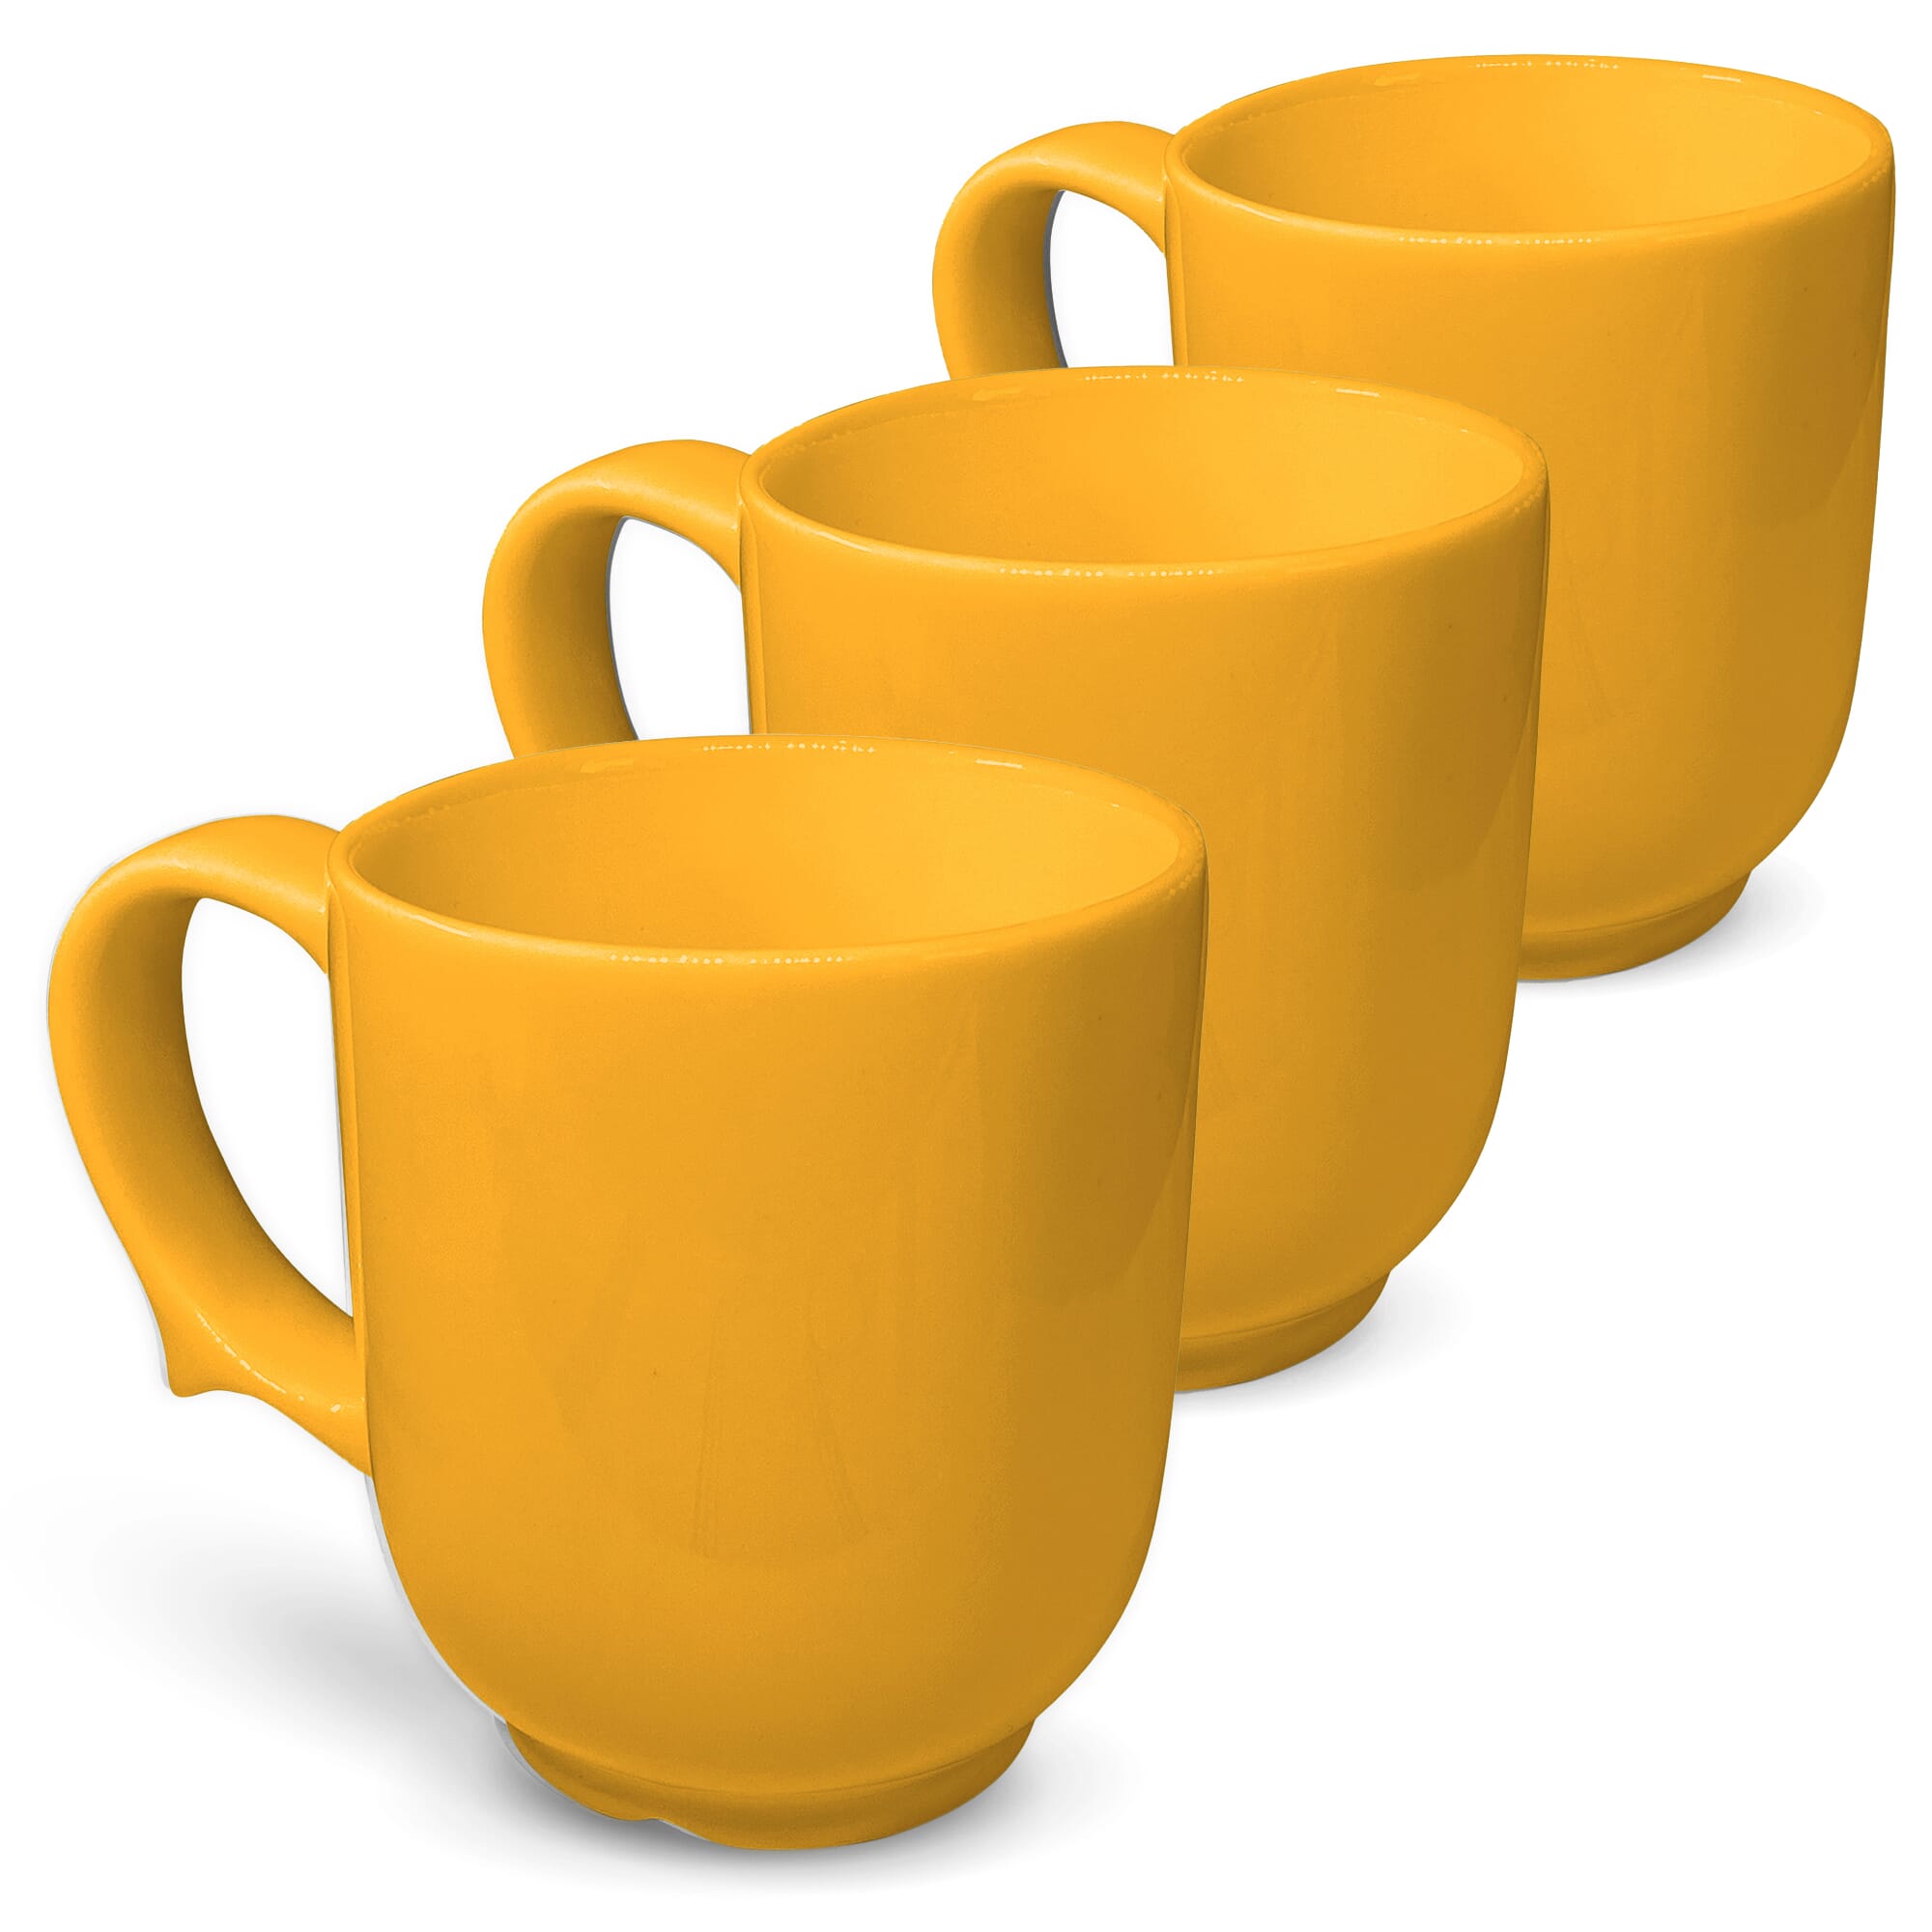 View Dignity One Handled Mug Yellow Pack of 3 information